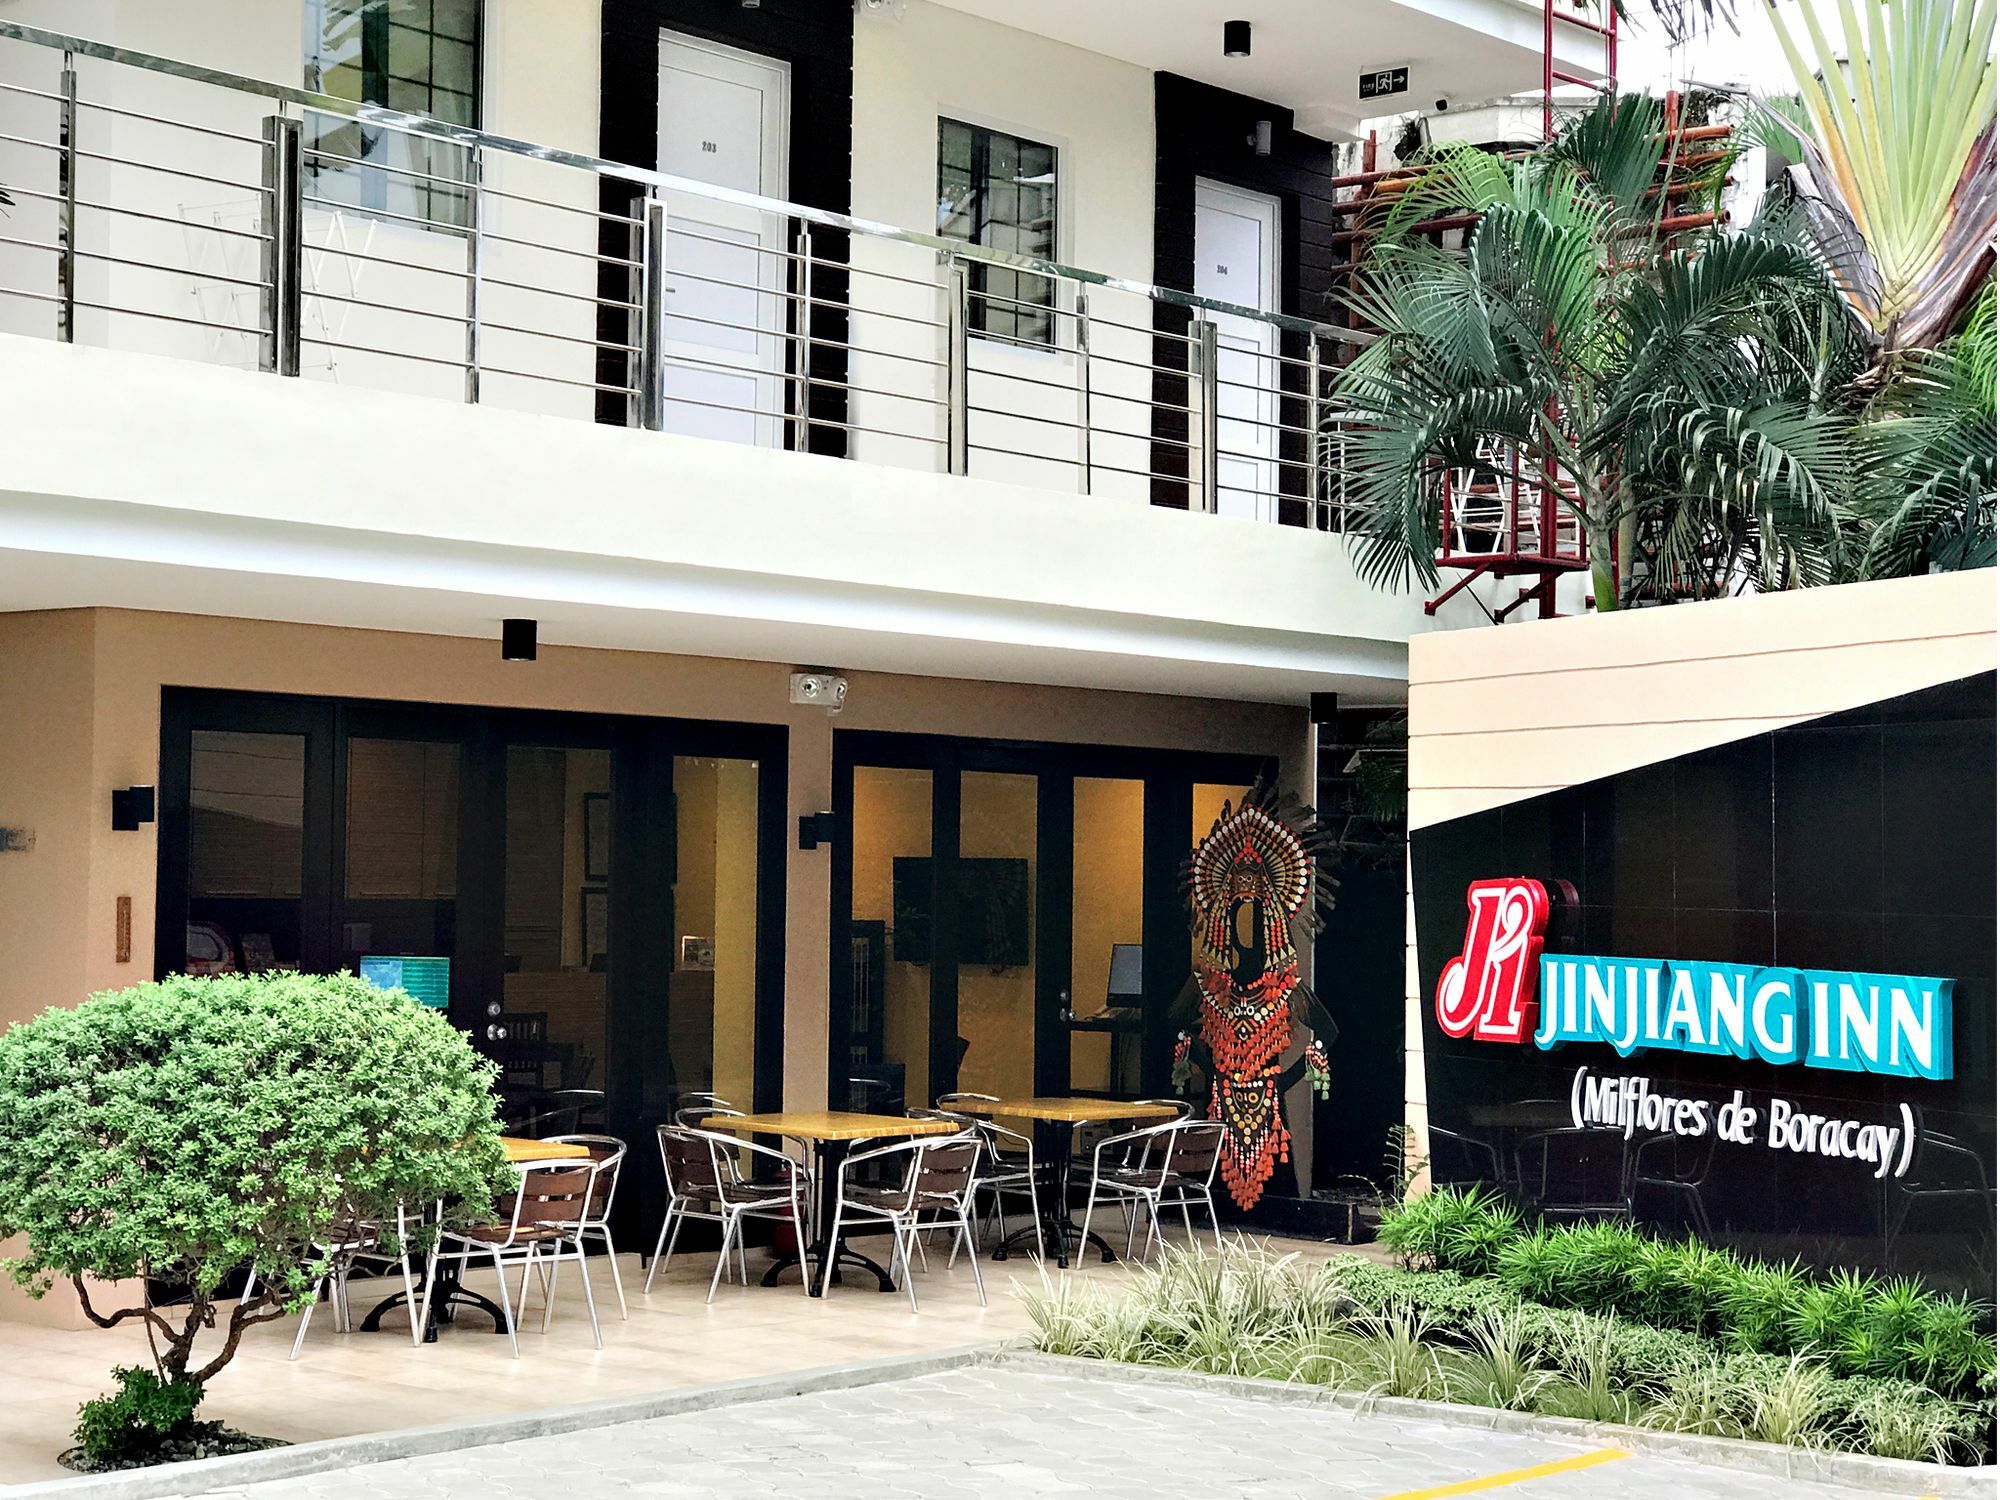 5D4N Boracay Package with Airfare | Jinjiang Inn from Manila - day 1